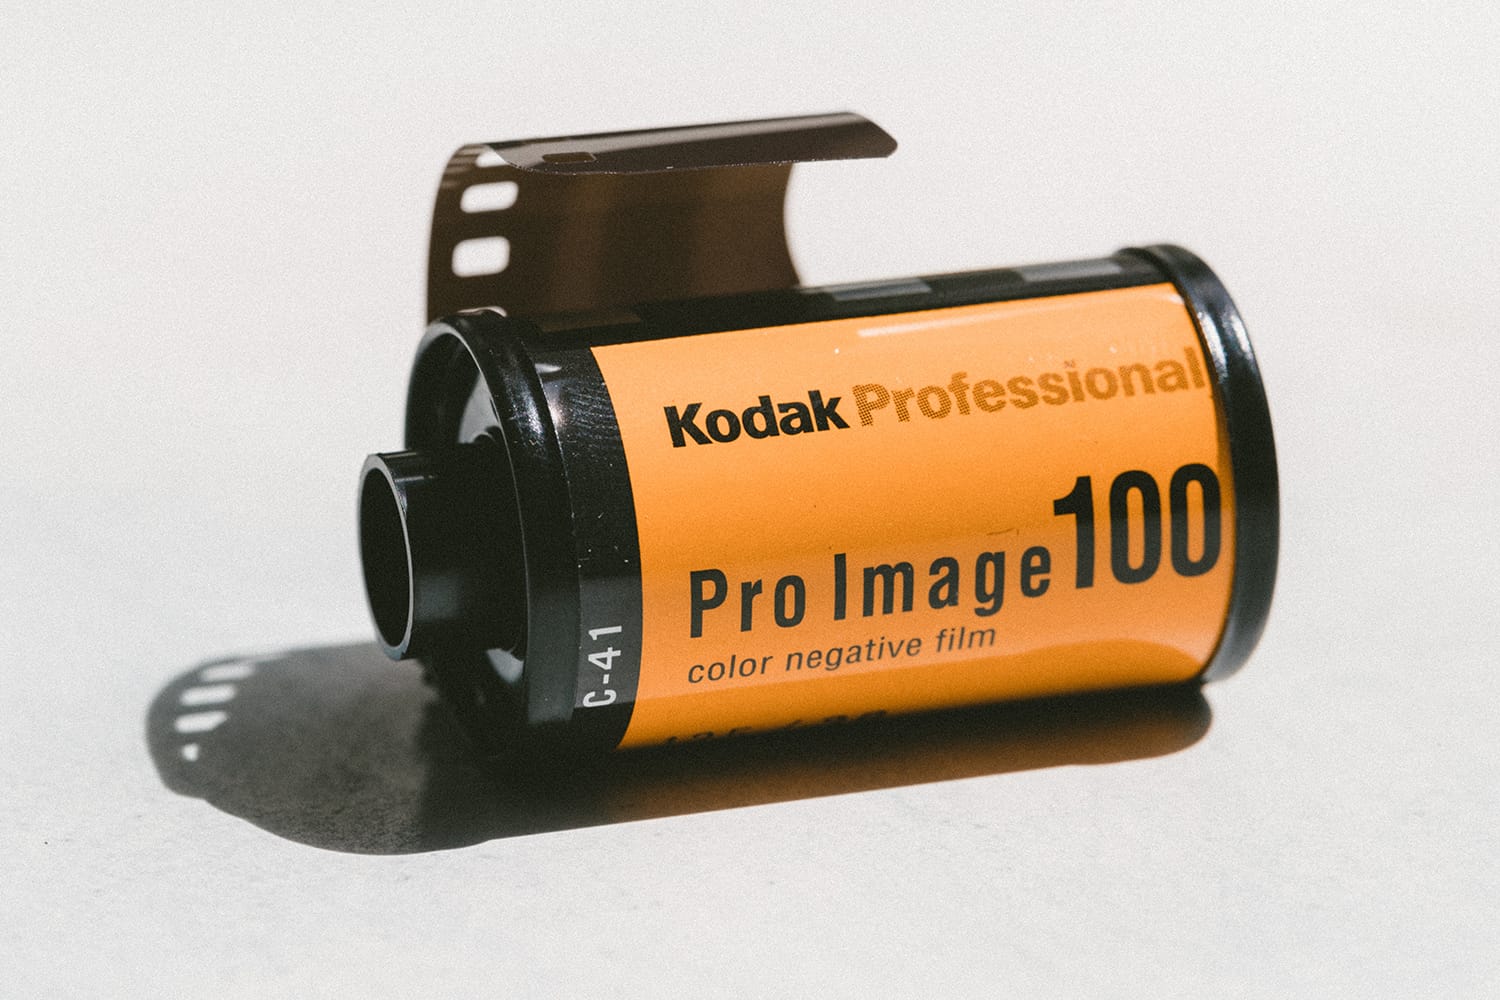 6 Great Tips for Getting Started With Traditional Film Photography